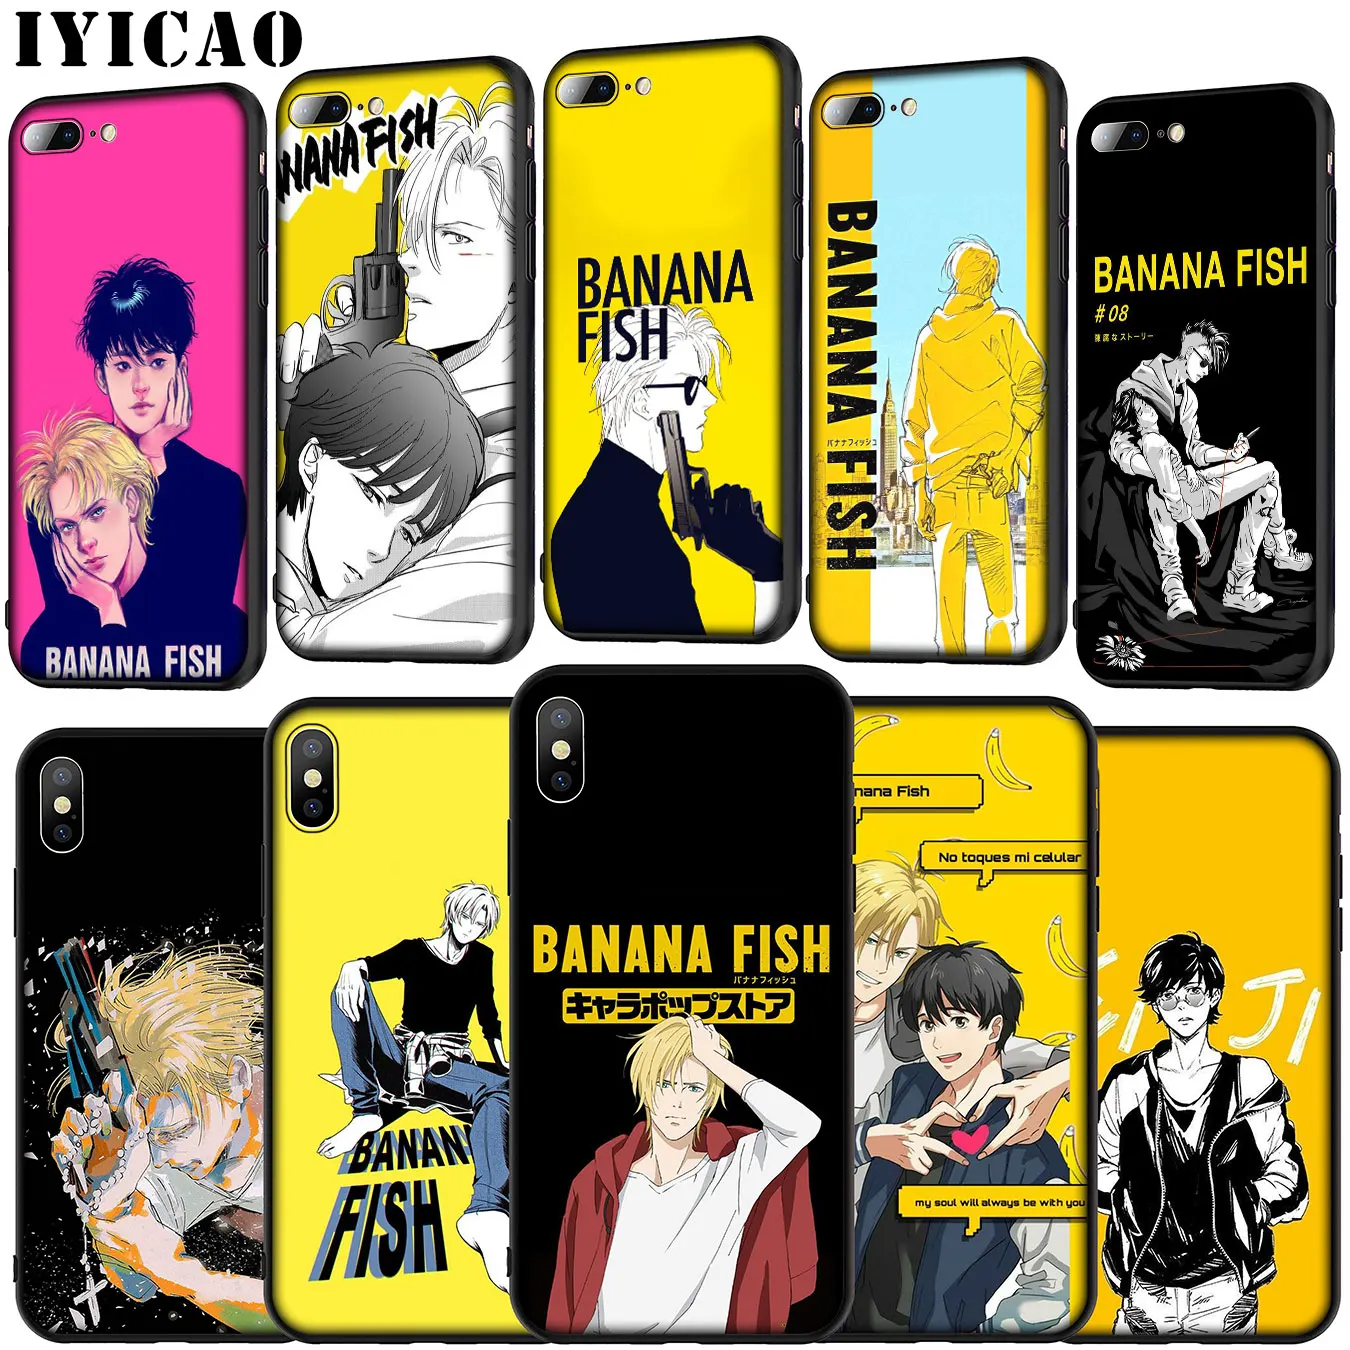 Banana Fish Anime Soft Silicone Cover Case For Iphone 11 Pro Xr X Xs Max 6 6s 7 8 Plus 5 5s Se Phone Case Fitted Cases Aliexpress